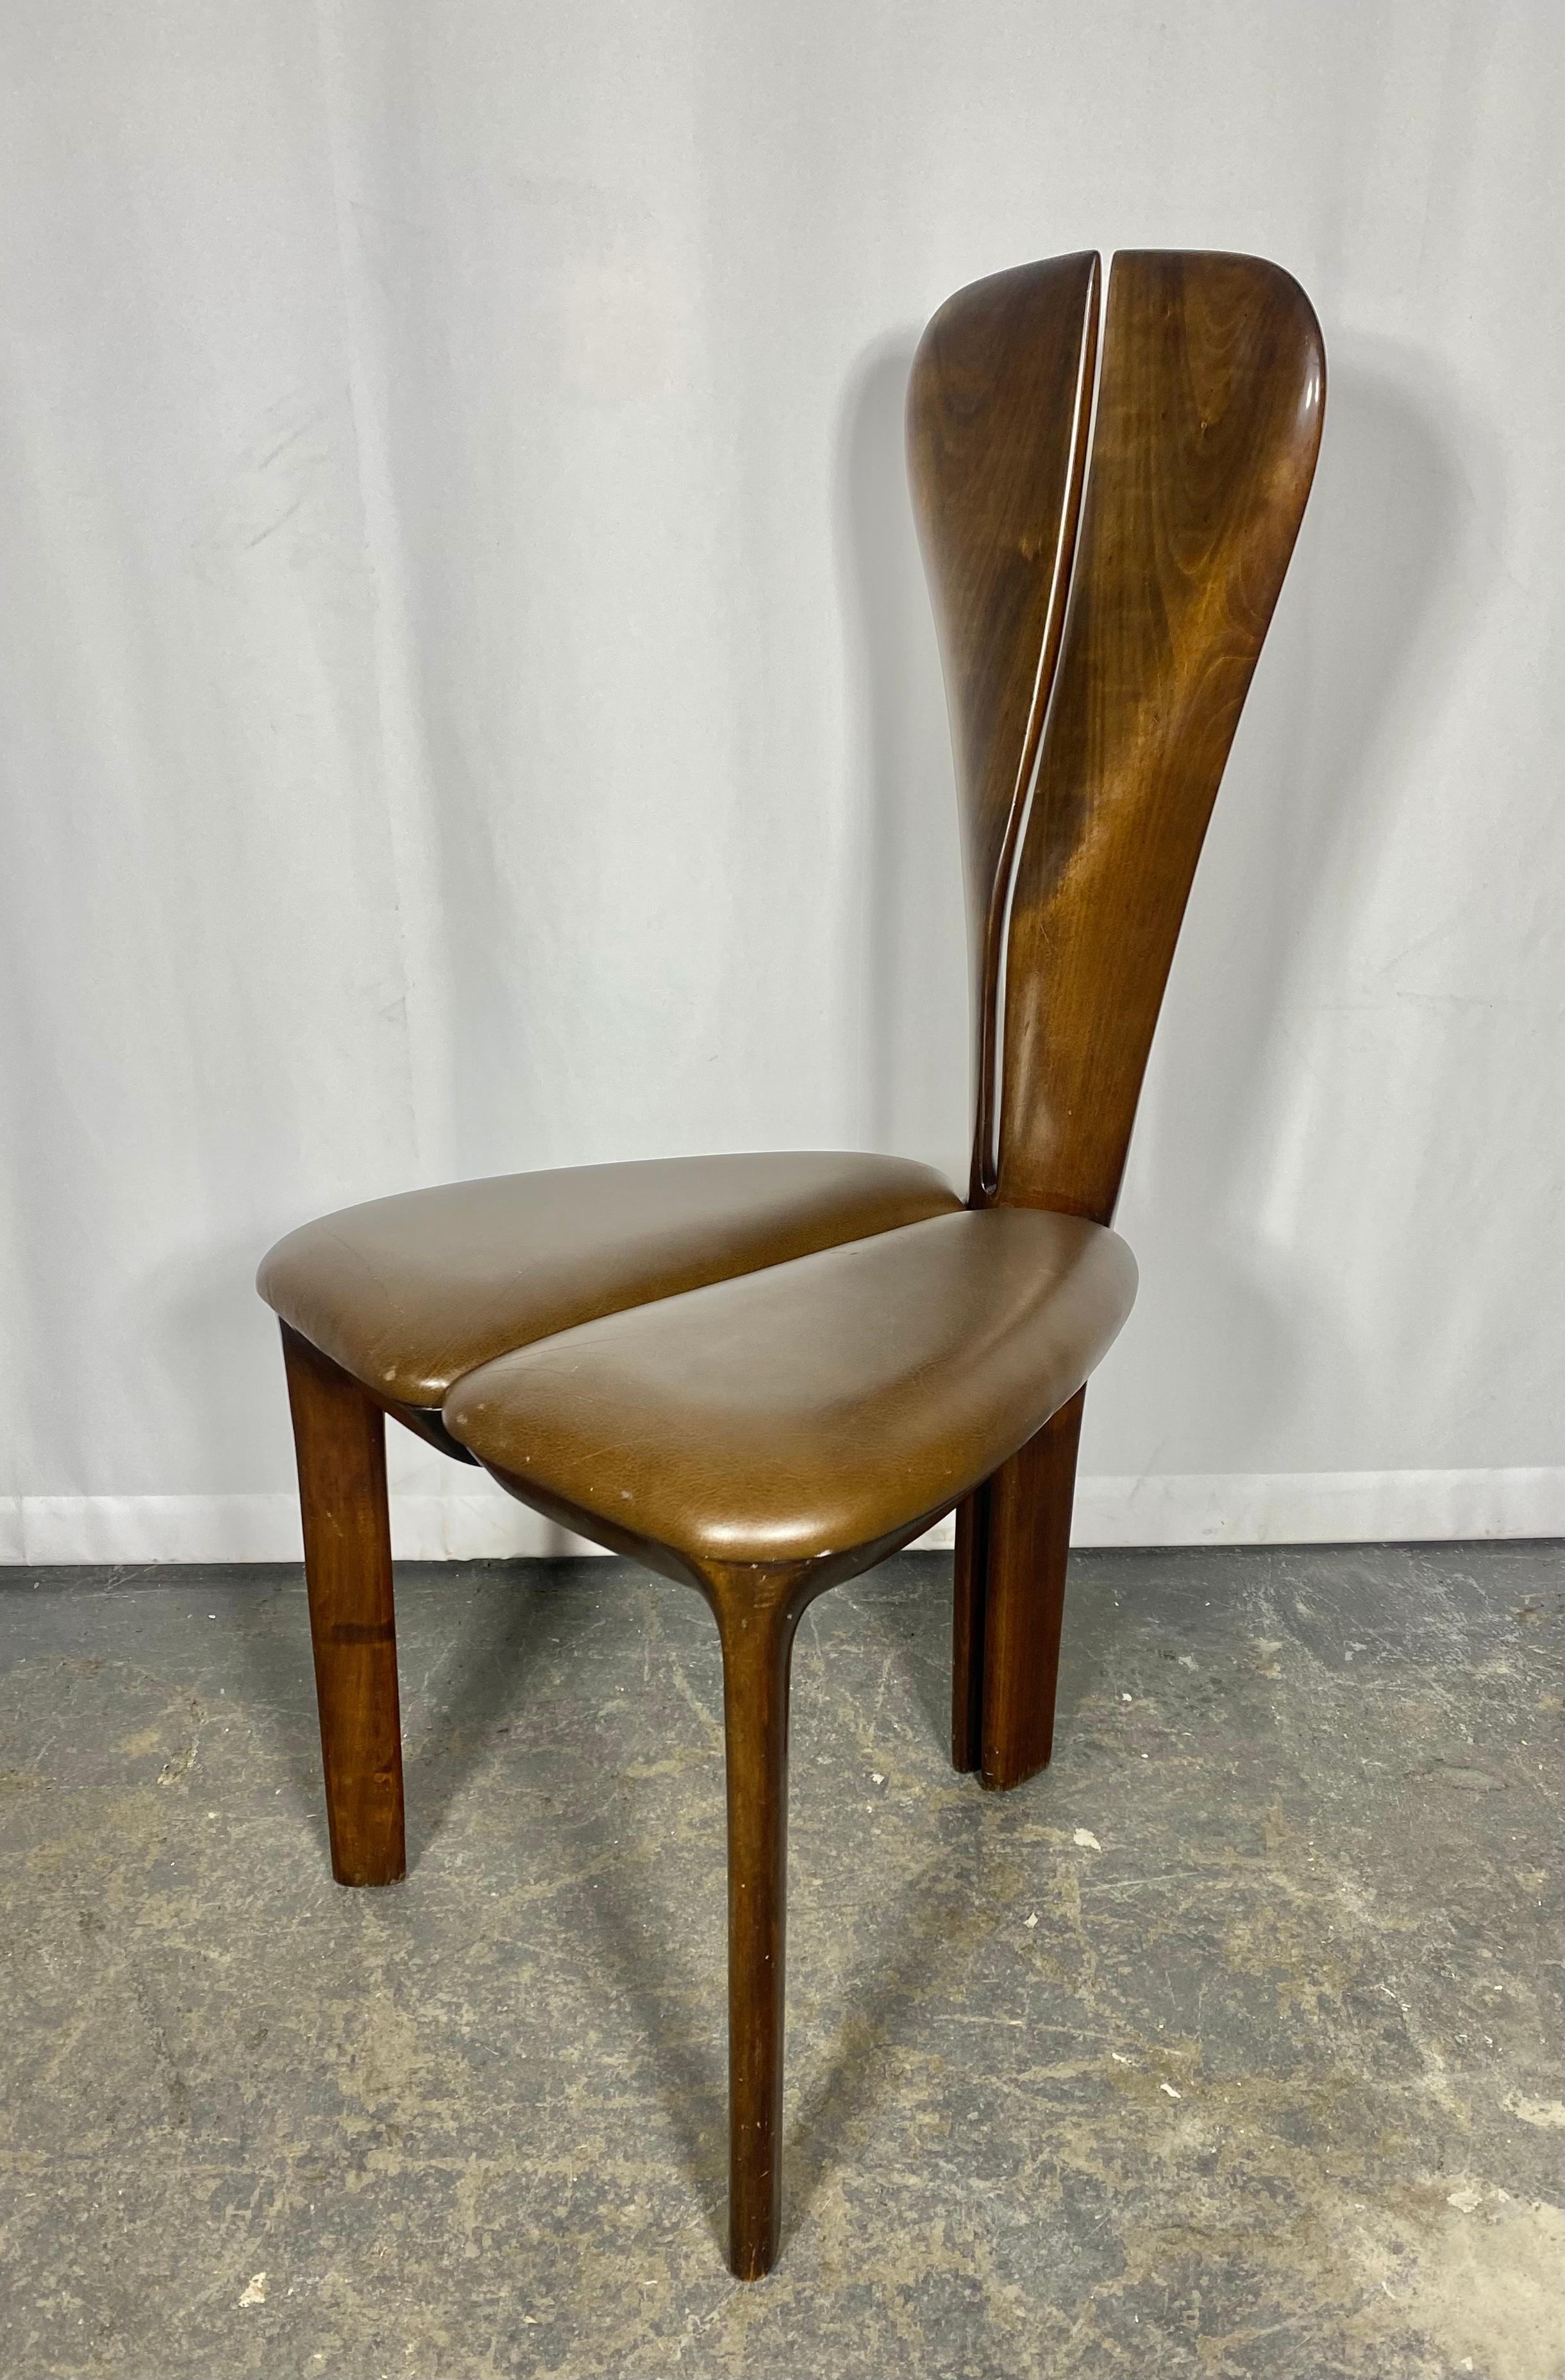 Unusual post modernist sculpted wood side/ desk chair by Edward Axel Roffman In Good Condition For Sale In Buffalo, NY